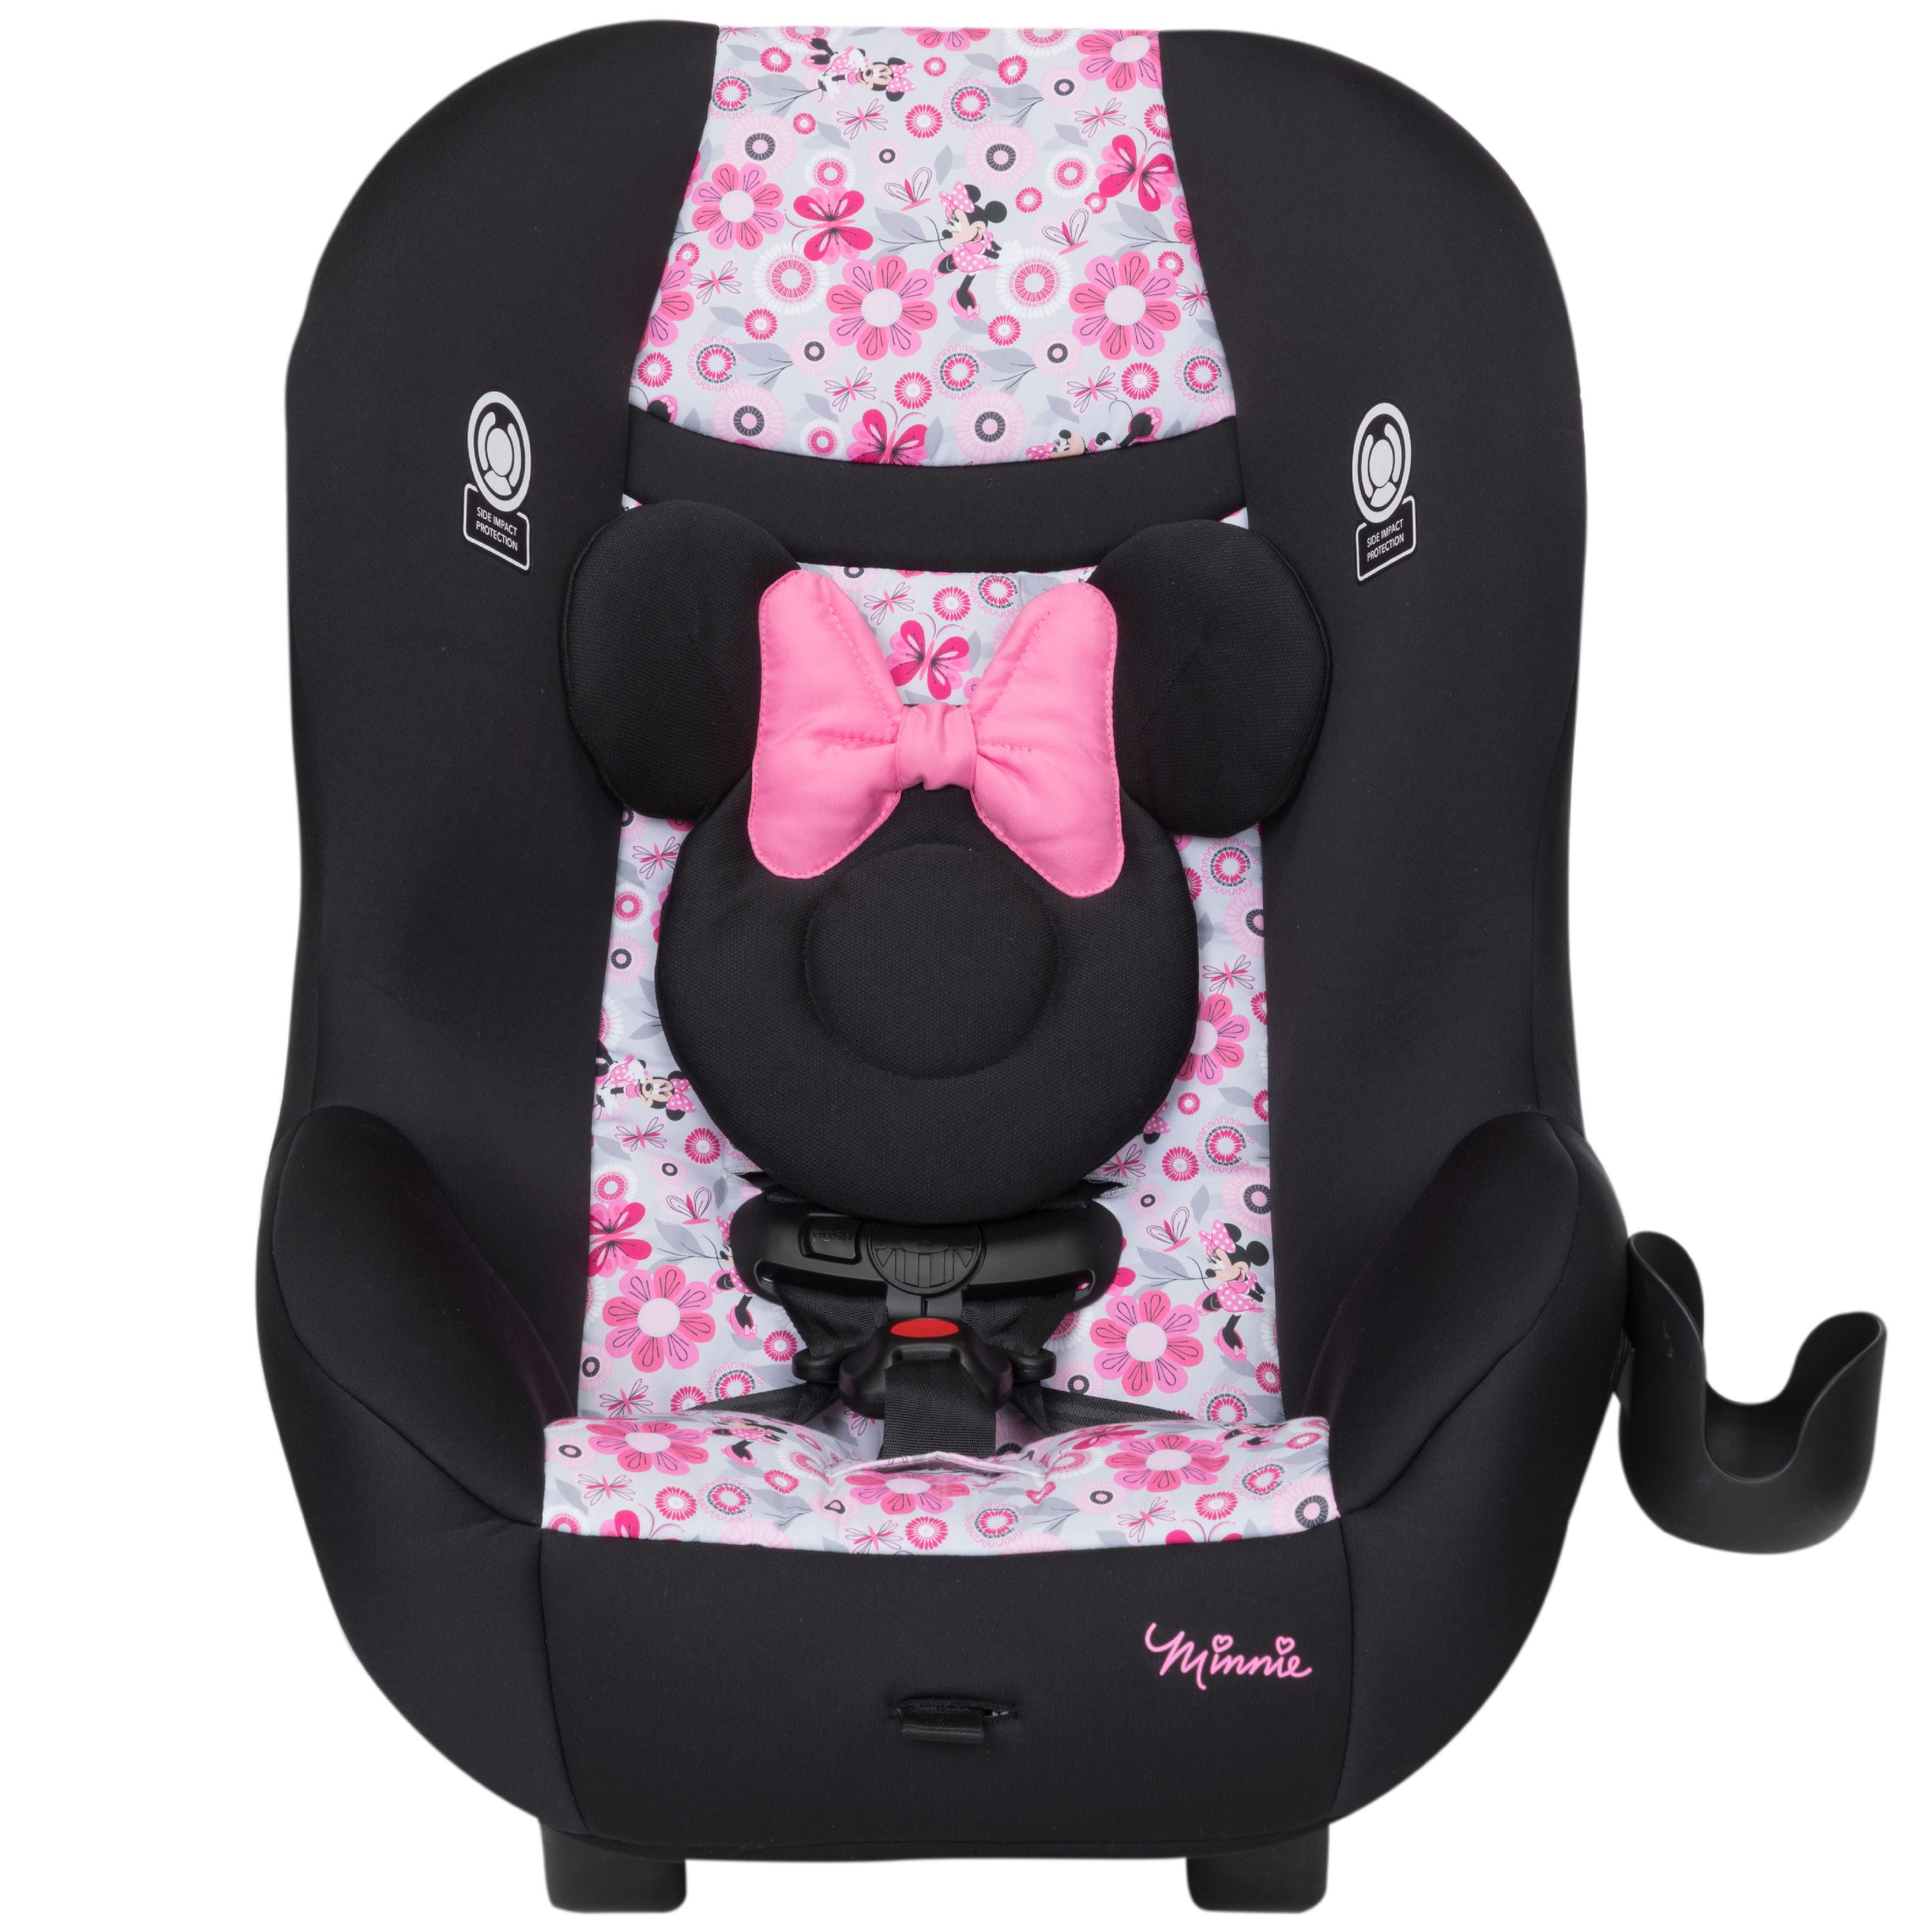 cosco minnie mouse car seat